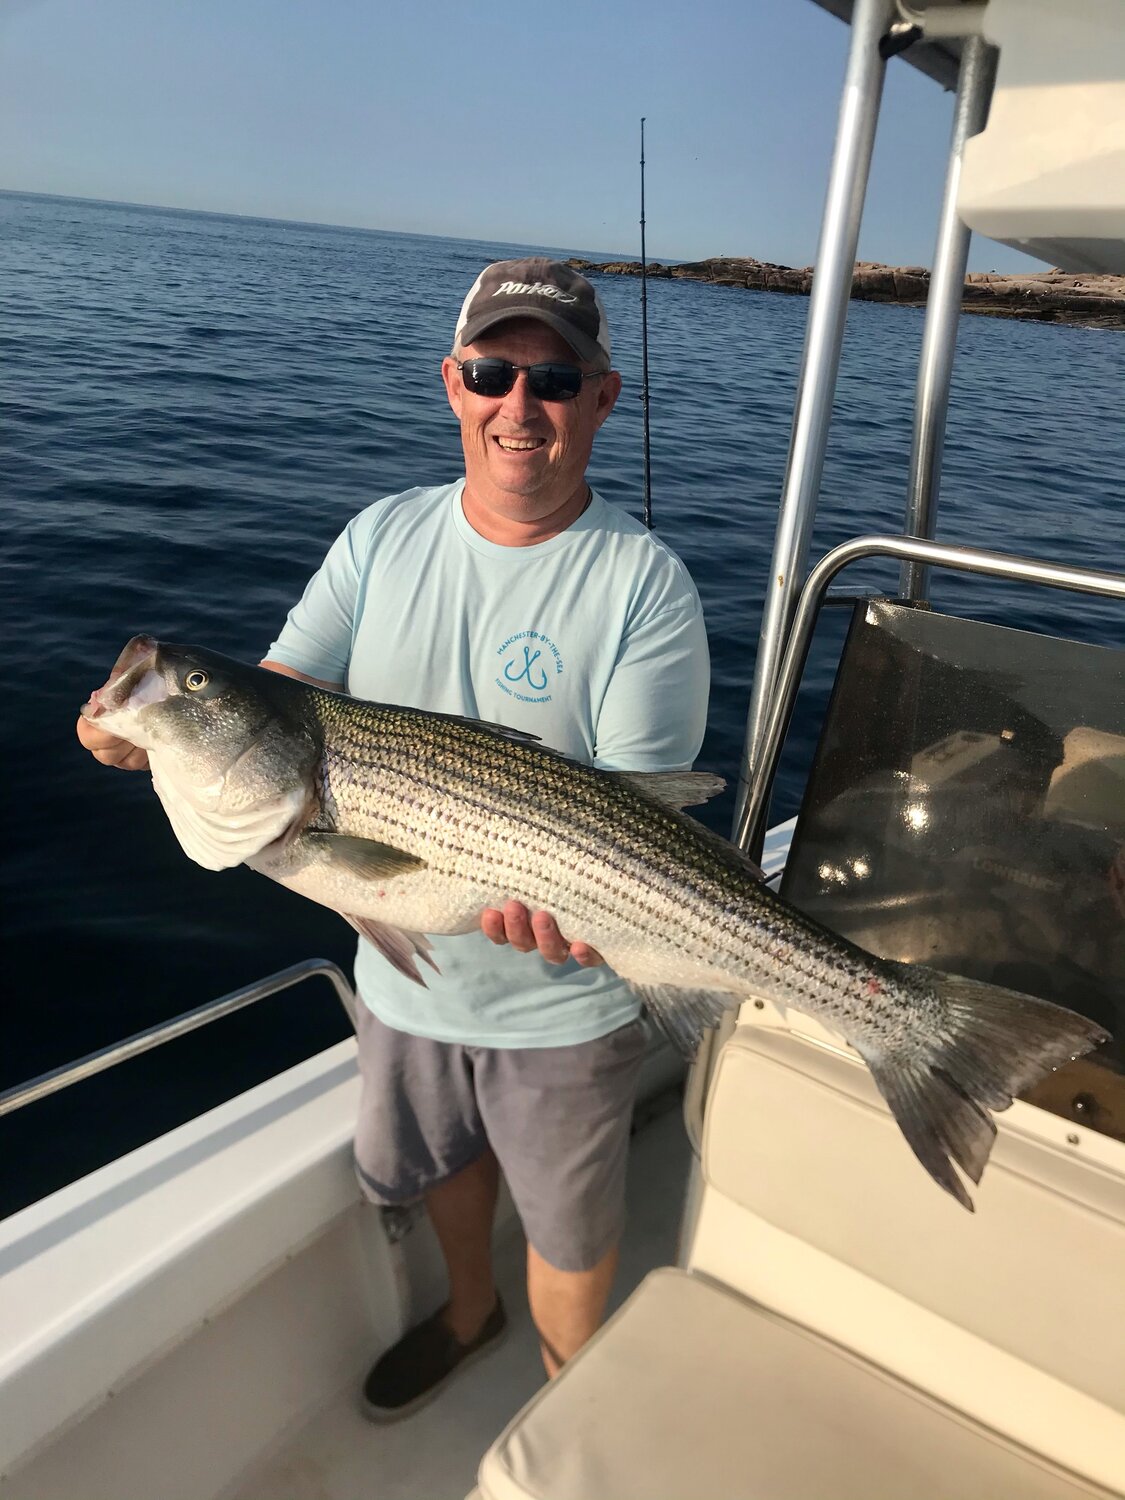 Paul Murray and His 41-inch Striped Bass